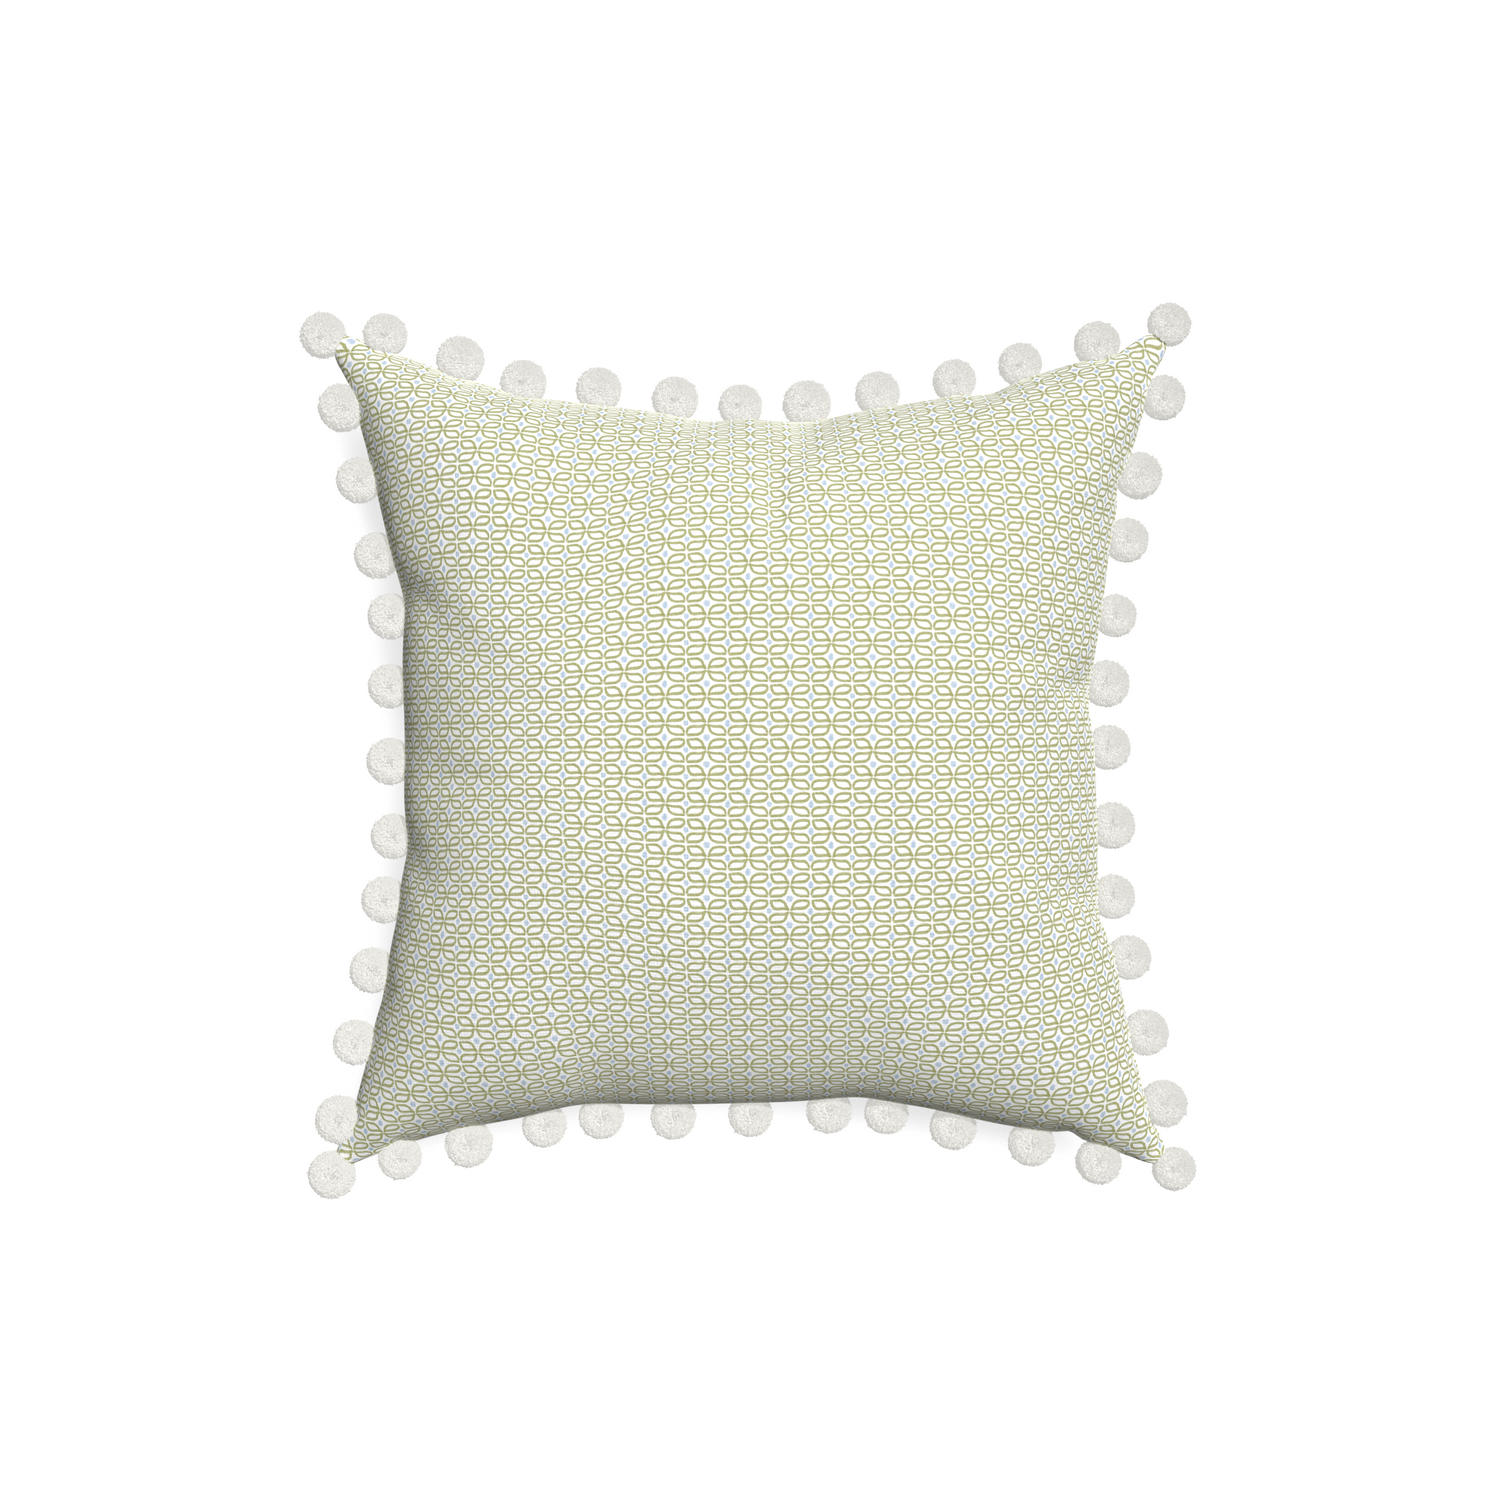 18-square loomi moss custom pillow with snow pom pom on white background